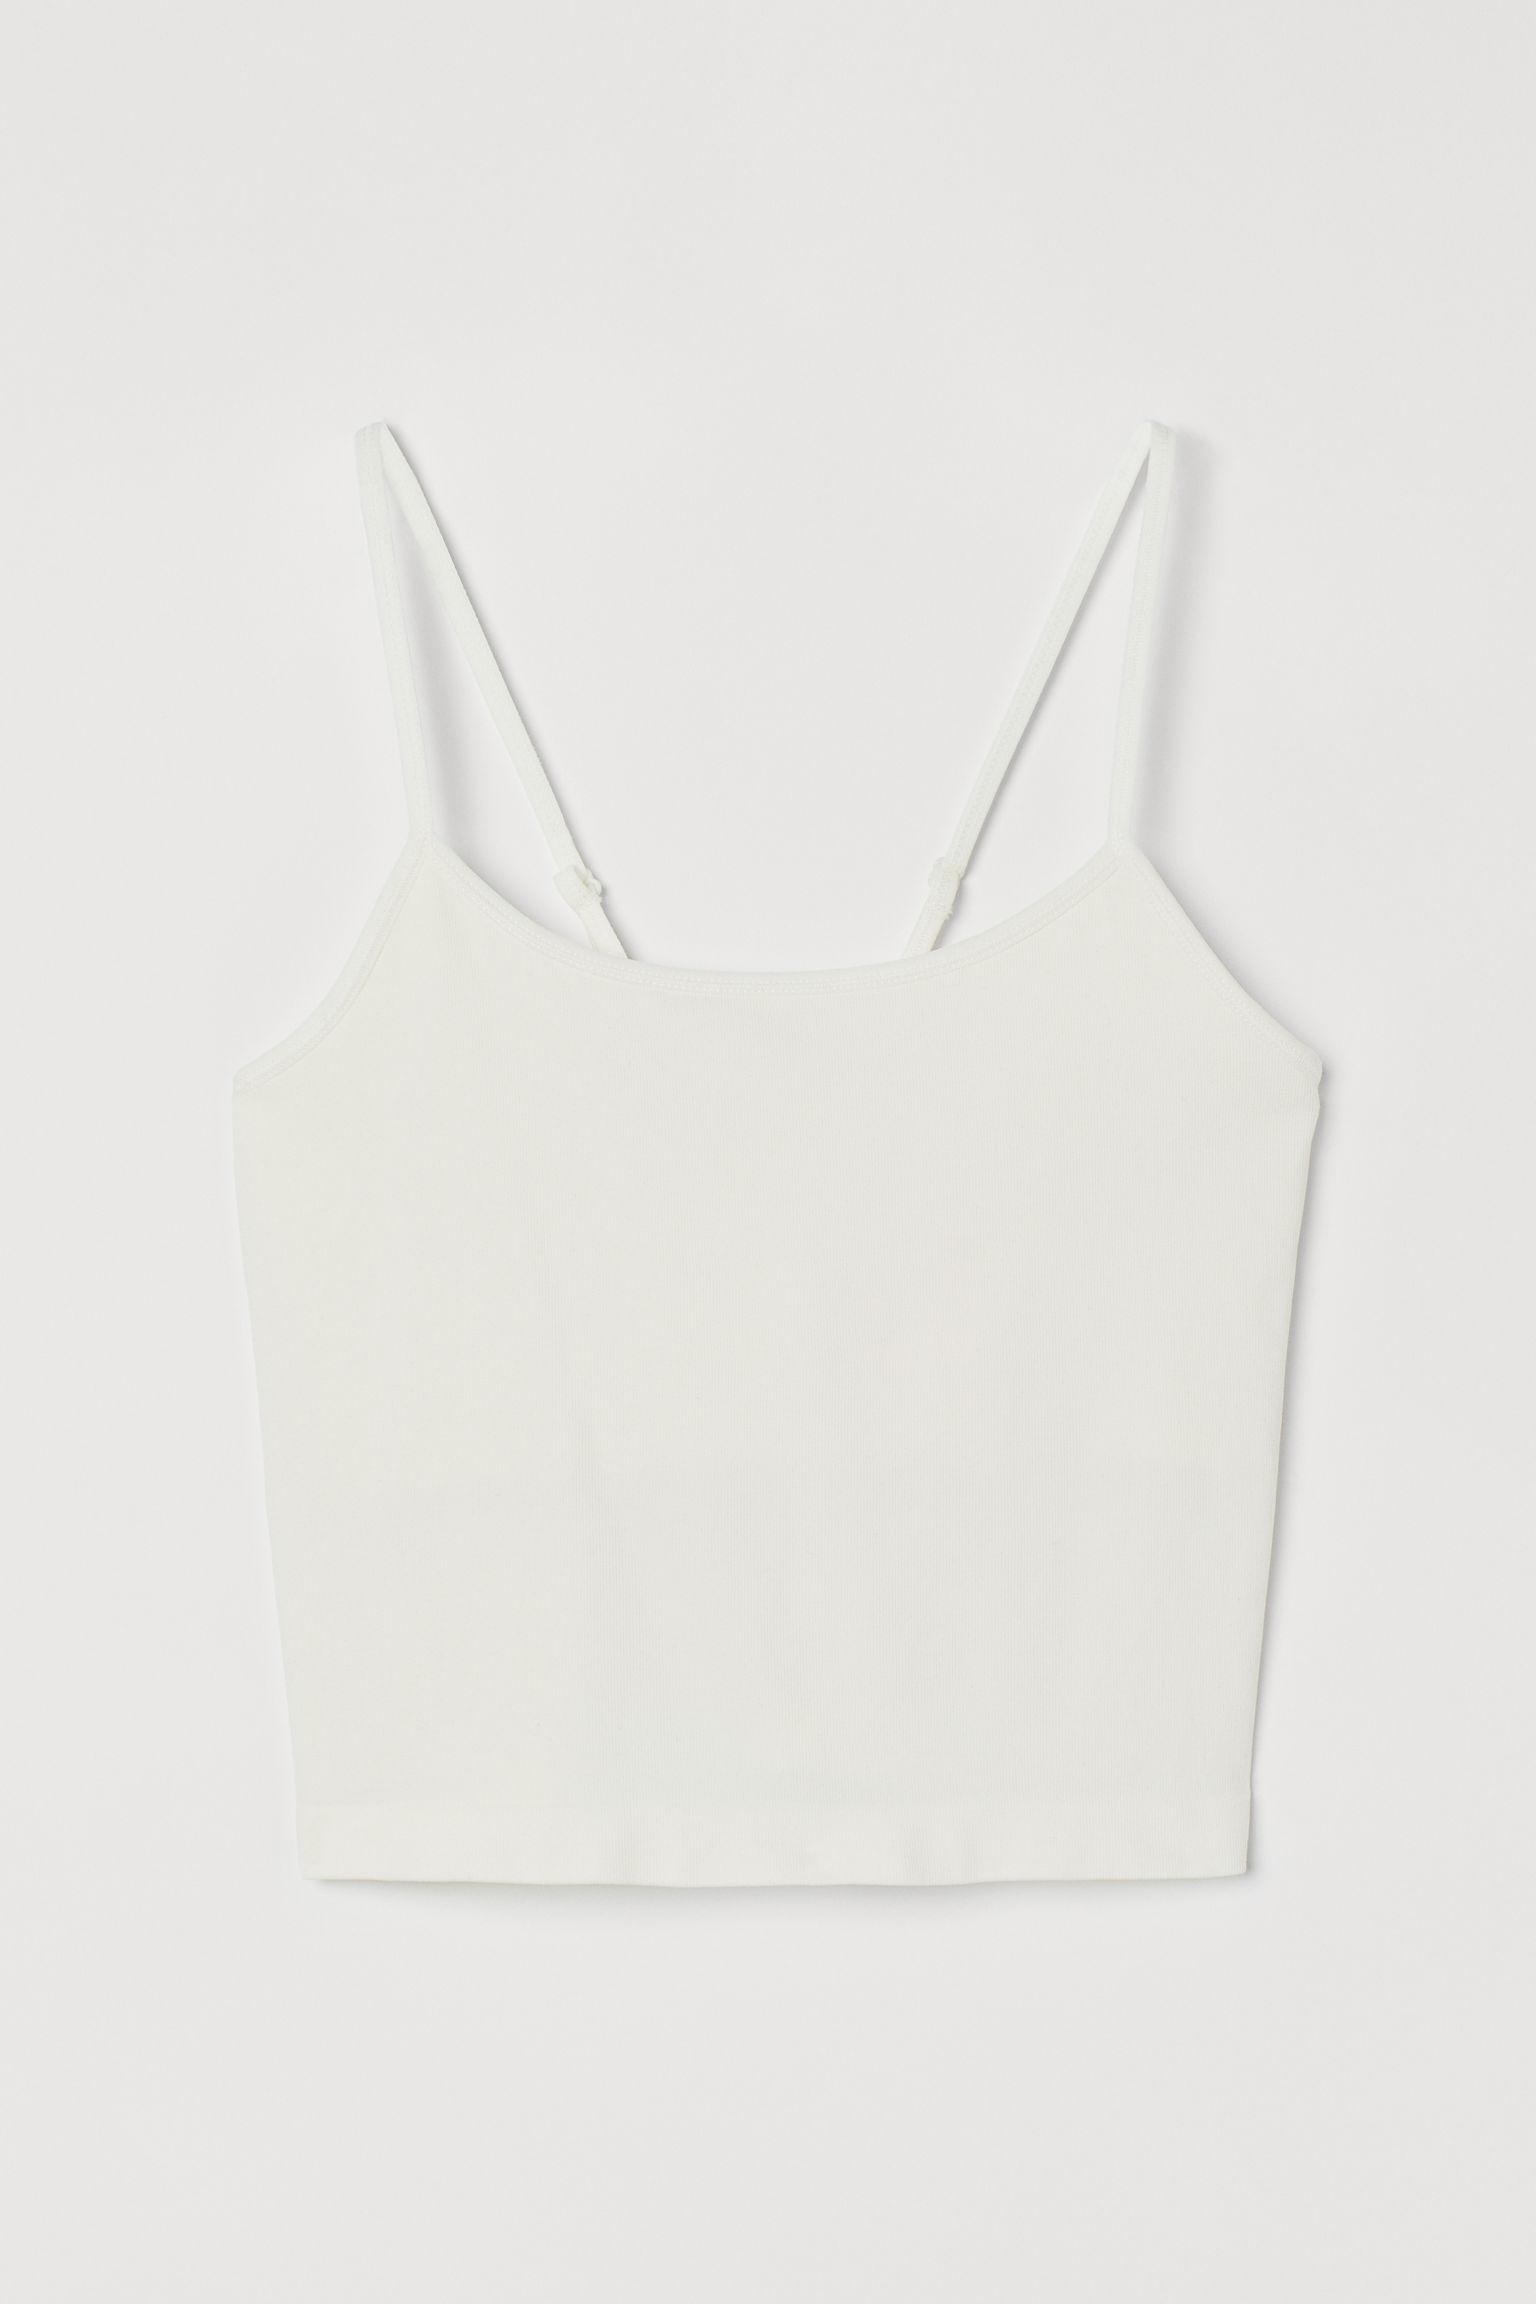 H&M Seamless Sports Top in White - Lyst